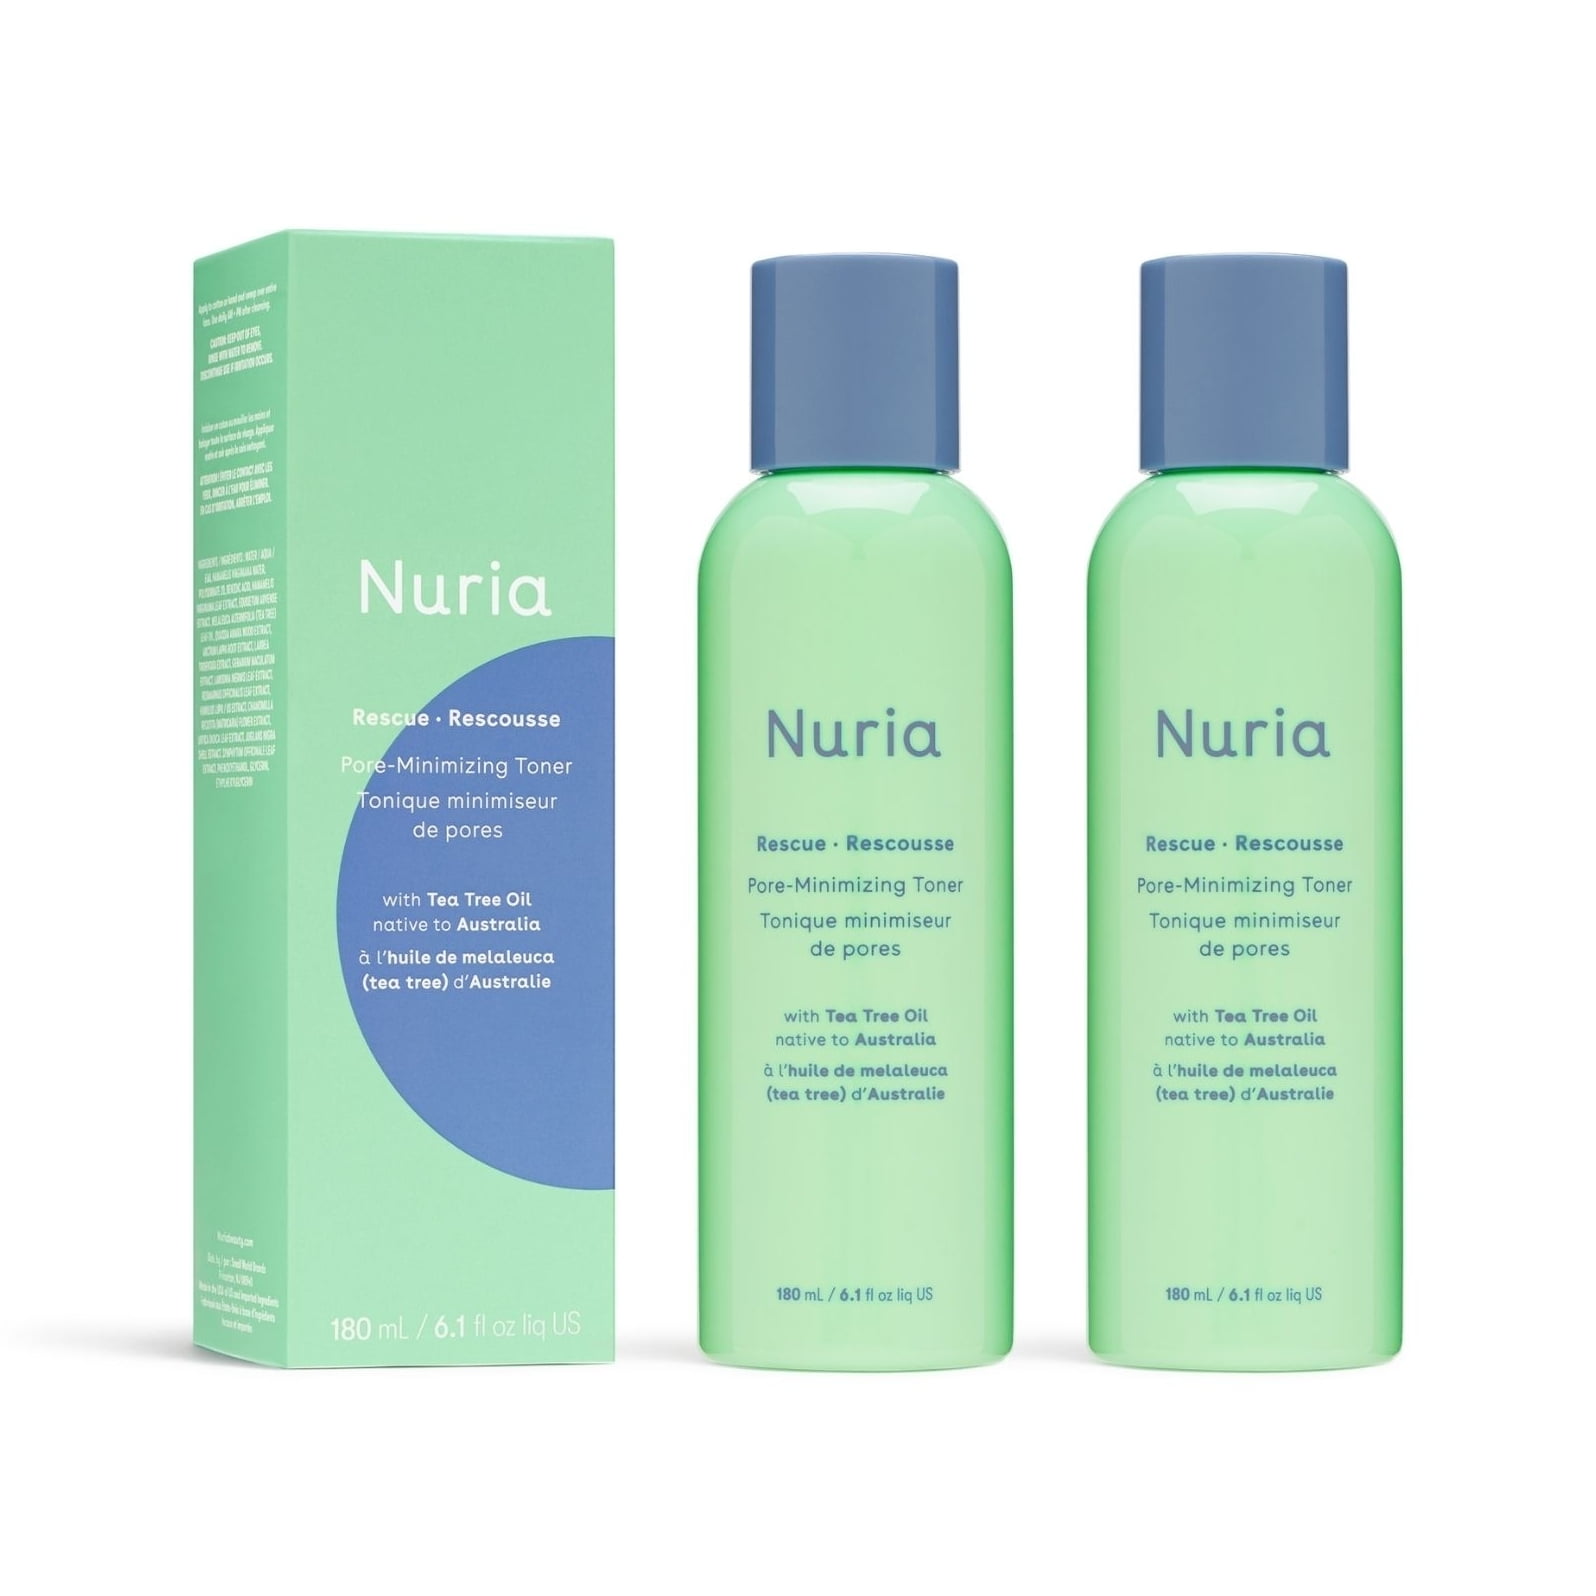 Nuria - Rescue Skin Toner for Face Pore Minimizer, Tea Tree Toner with Pure Witch Hazel Extract, Horsetail and Rosemary,